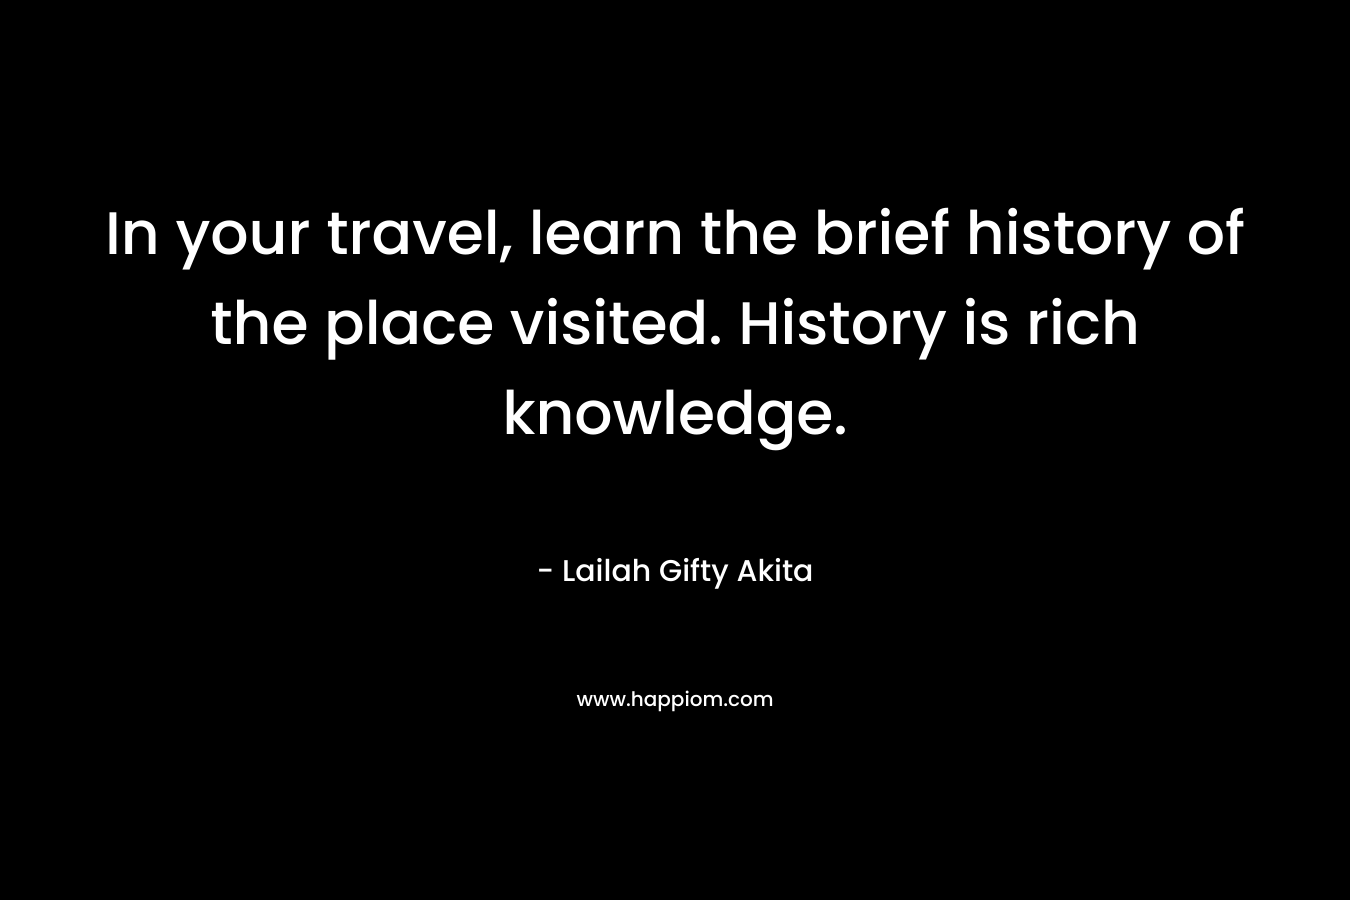 In your travel, learn the brief history of the place visited. History is rich knowledge. – Lailah Gifty Akita